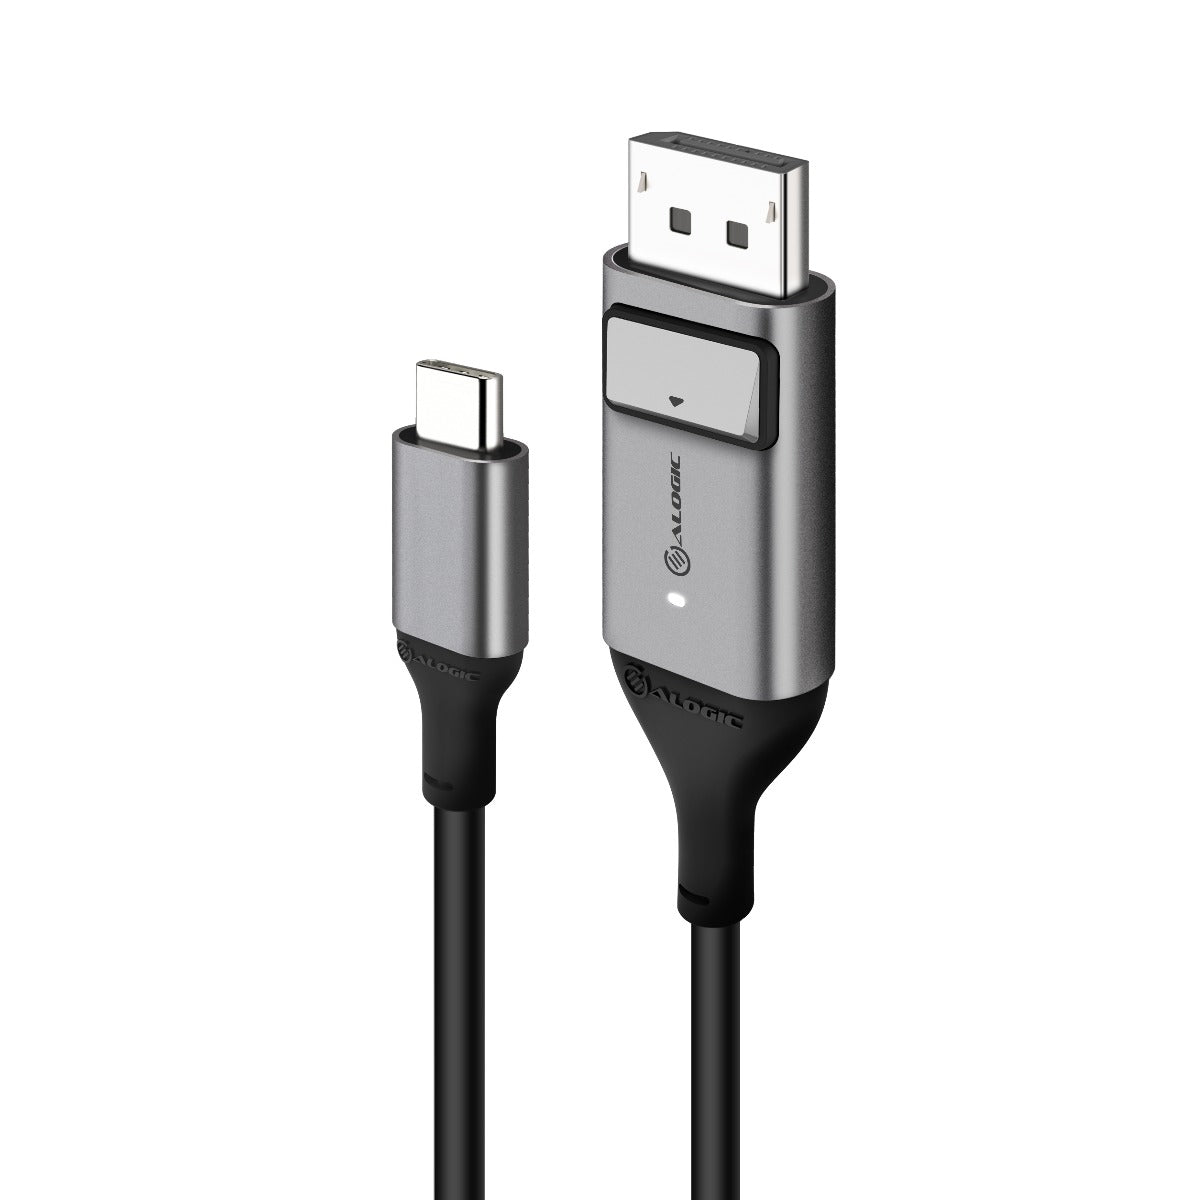 Belkin USB-C to HDMI Adapter + Charge (Supports 4K UHD Video, Passthrough  Power up to 60W for Connected Devices) MacBook Pro - Micro Center